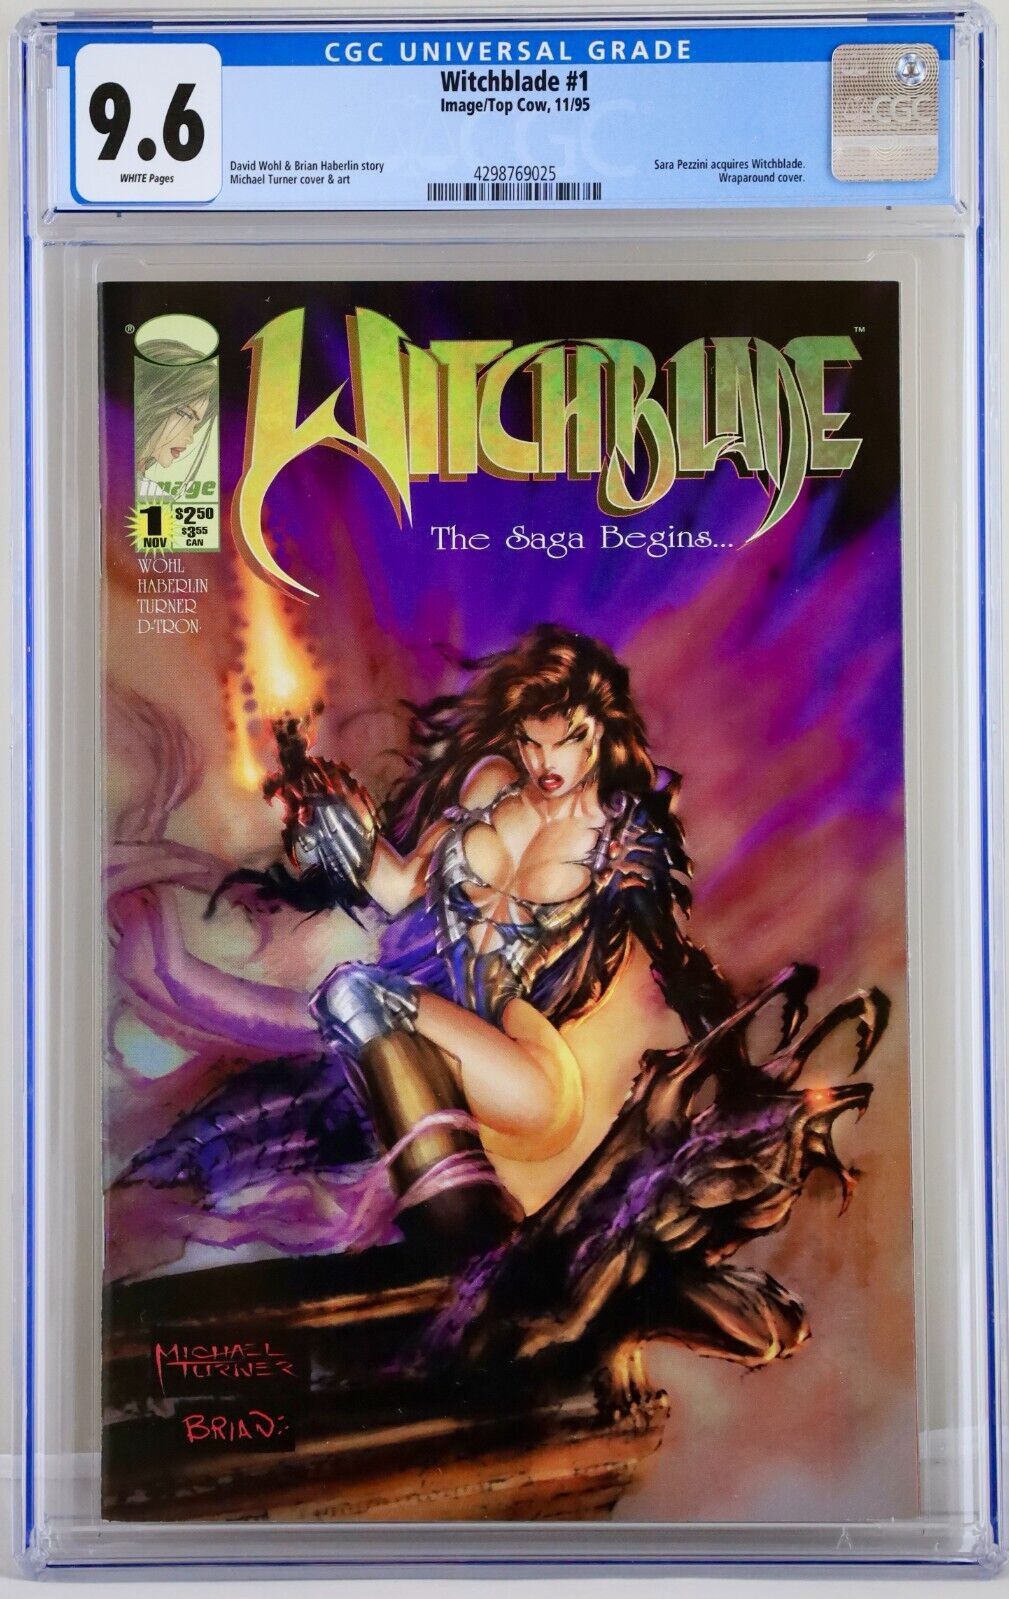 Comics WITCHBLADE #1 CGC 9.6 Near Mint+  White Pages Image Top Cow 1995